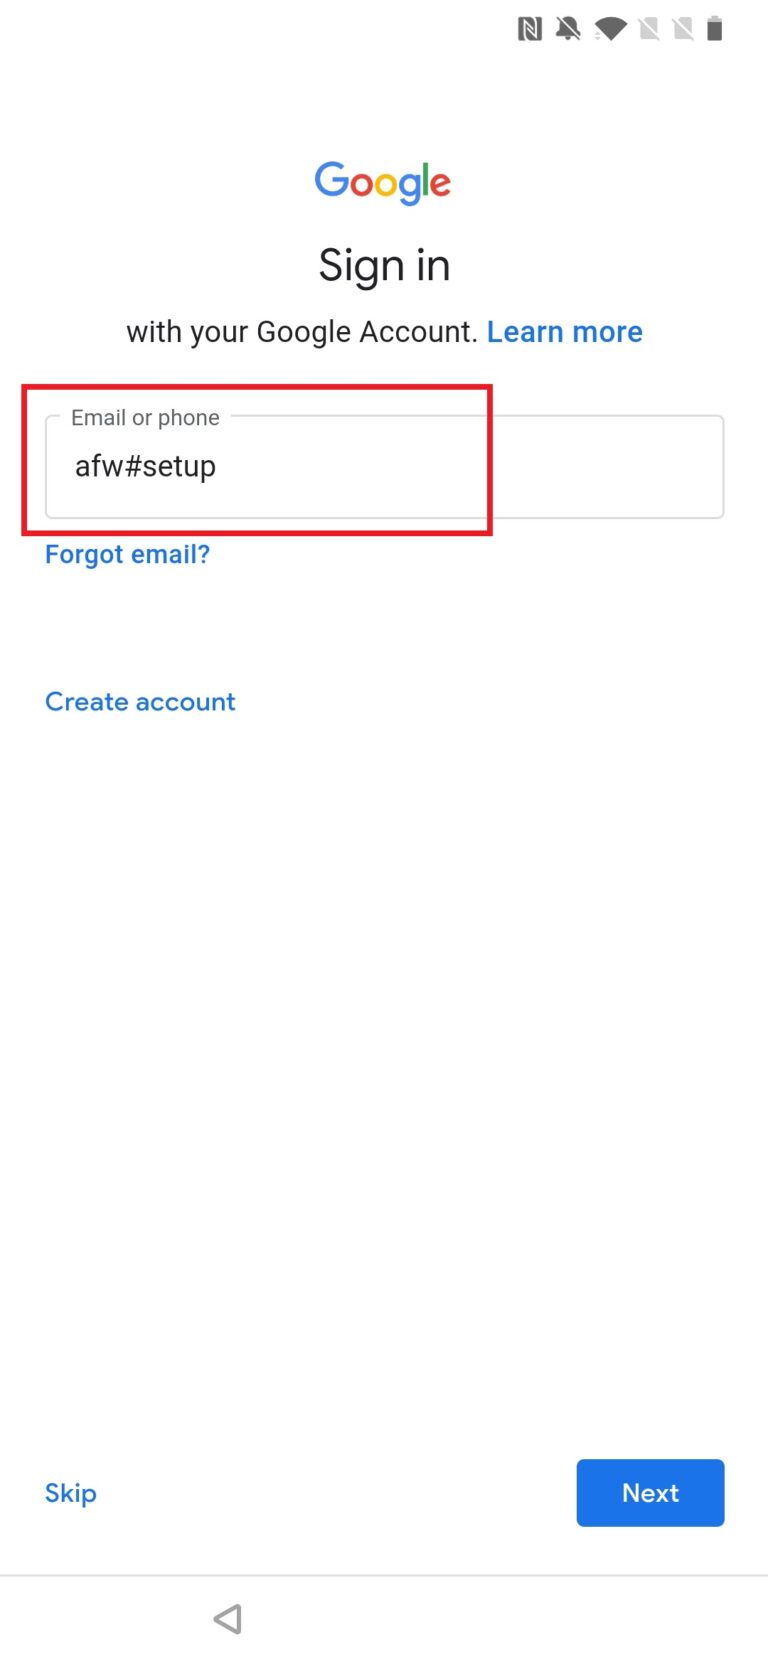 enter "afw#setup" in the input box on the Gmail sign-in page 